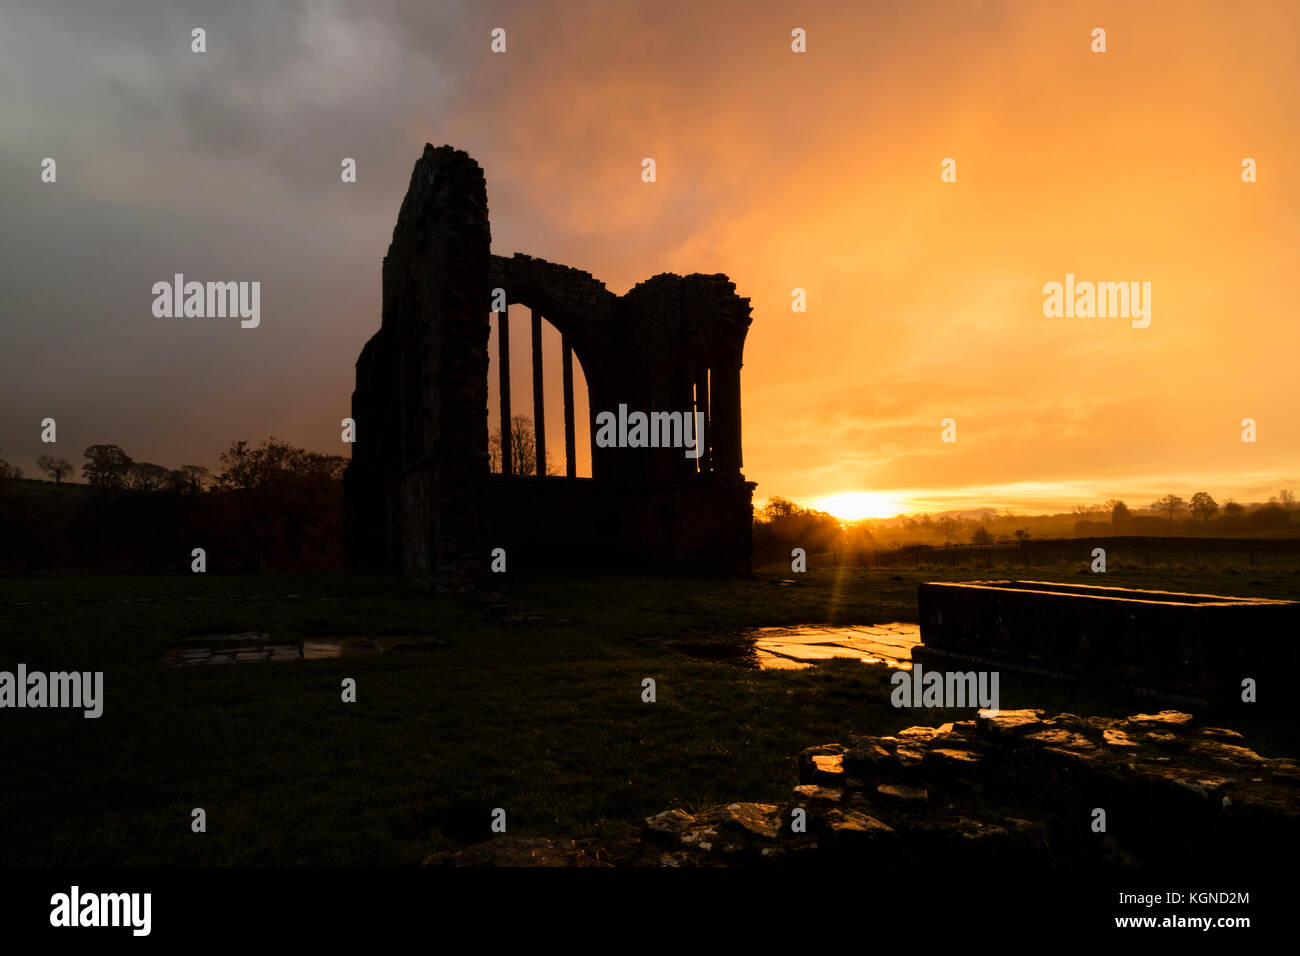 Egglestone Abbey, Barnard Castle, Teesdale, County Durham UK.  Thursday 9th November 2017. UK Weather.  Heavy showers to start the day as the first rays of the rising sun began to illuminate the ruins of Egglestone Abbey near Barnard Castle this morning.  Credit: David Forster/Alamy Live News Stock Photo